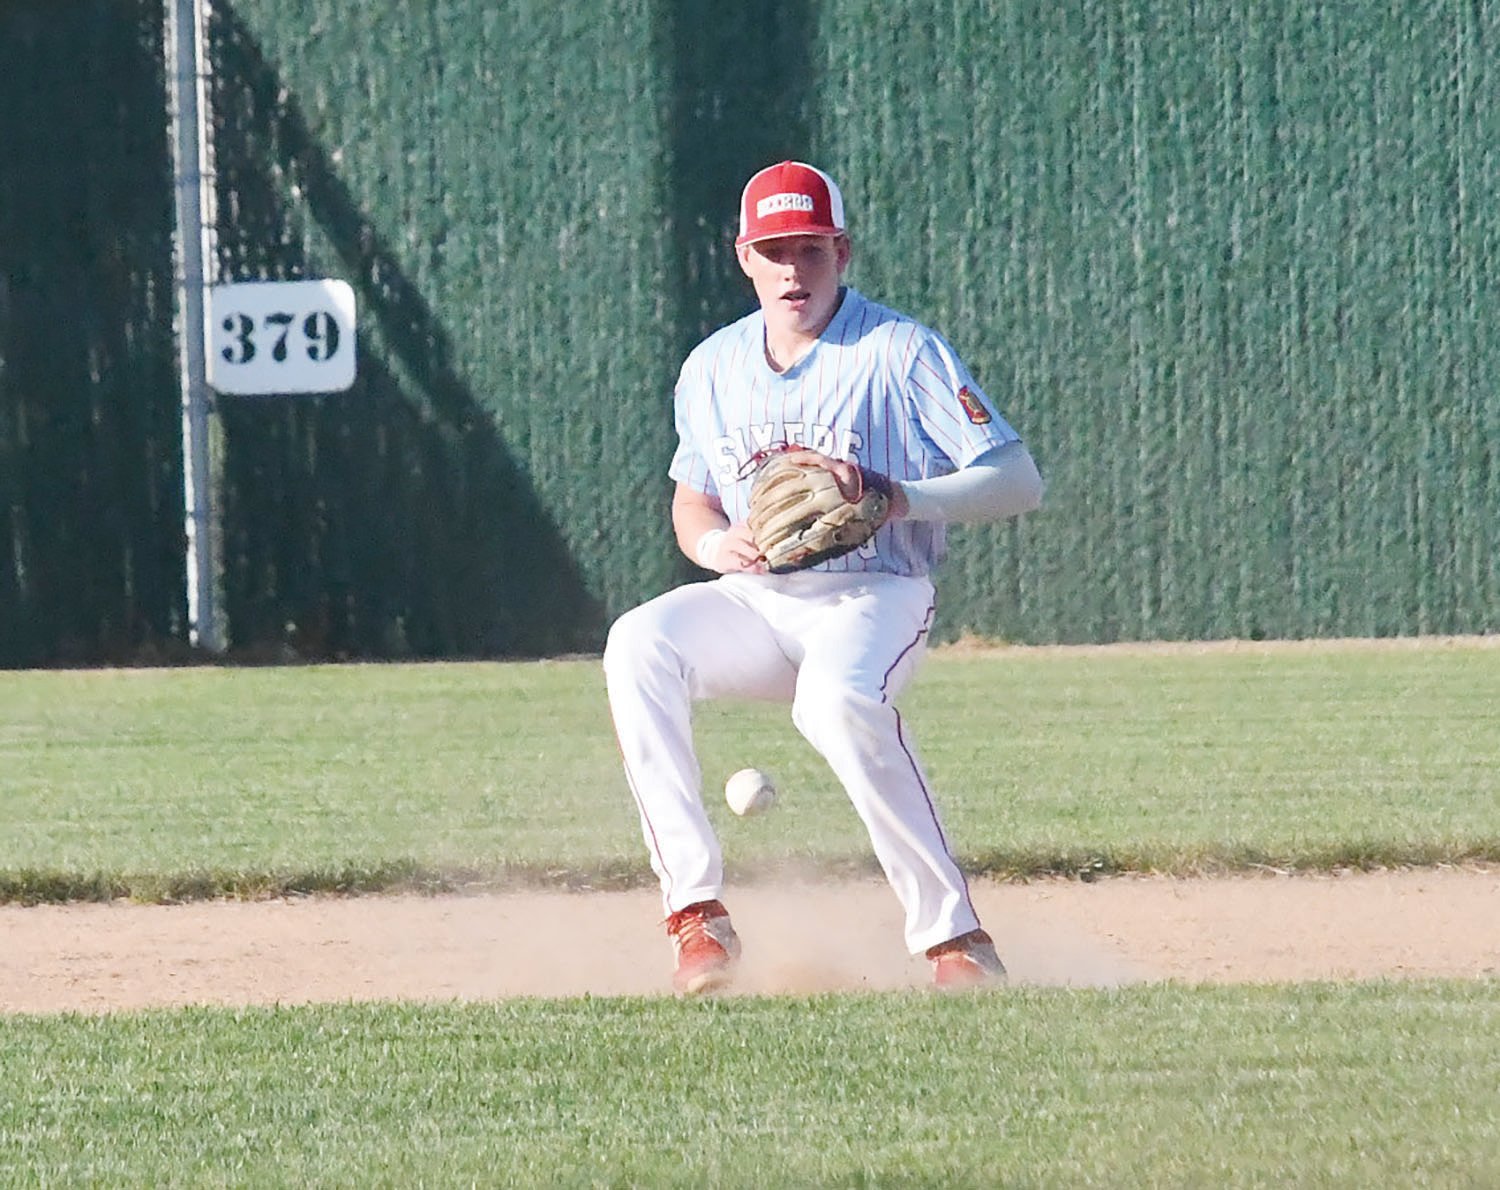 Jackson Engel, of Moberly, prepares to make a play on the ball at shortstop for the NEMO Sixers American Legion baseball team. Engel and the rest of the Sixers didn’t commit a single error during a doubleheader sweep of the Harrison County Hot Rods last Thursday at Burleigh Grimes Field in Trenton.